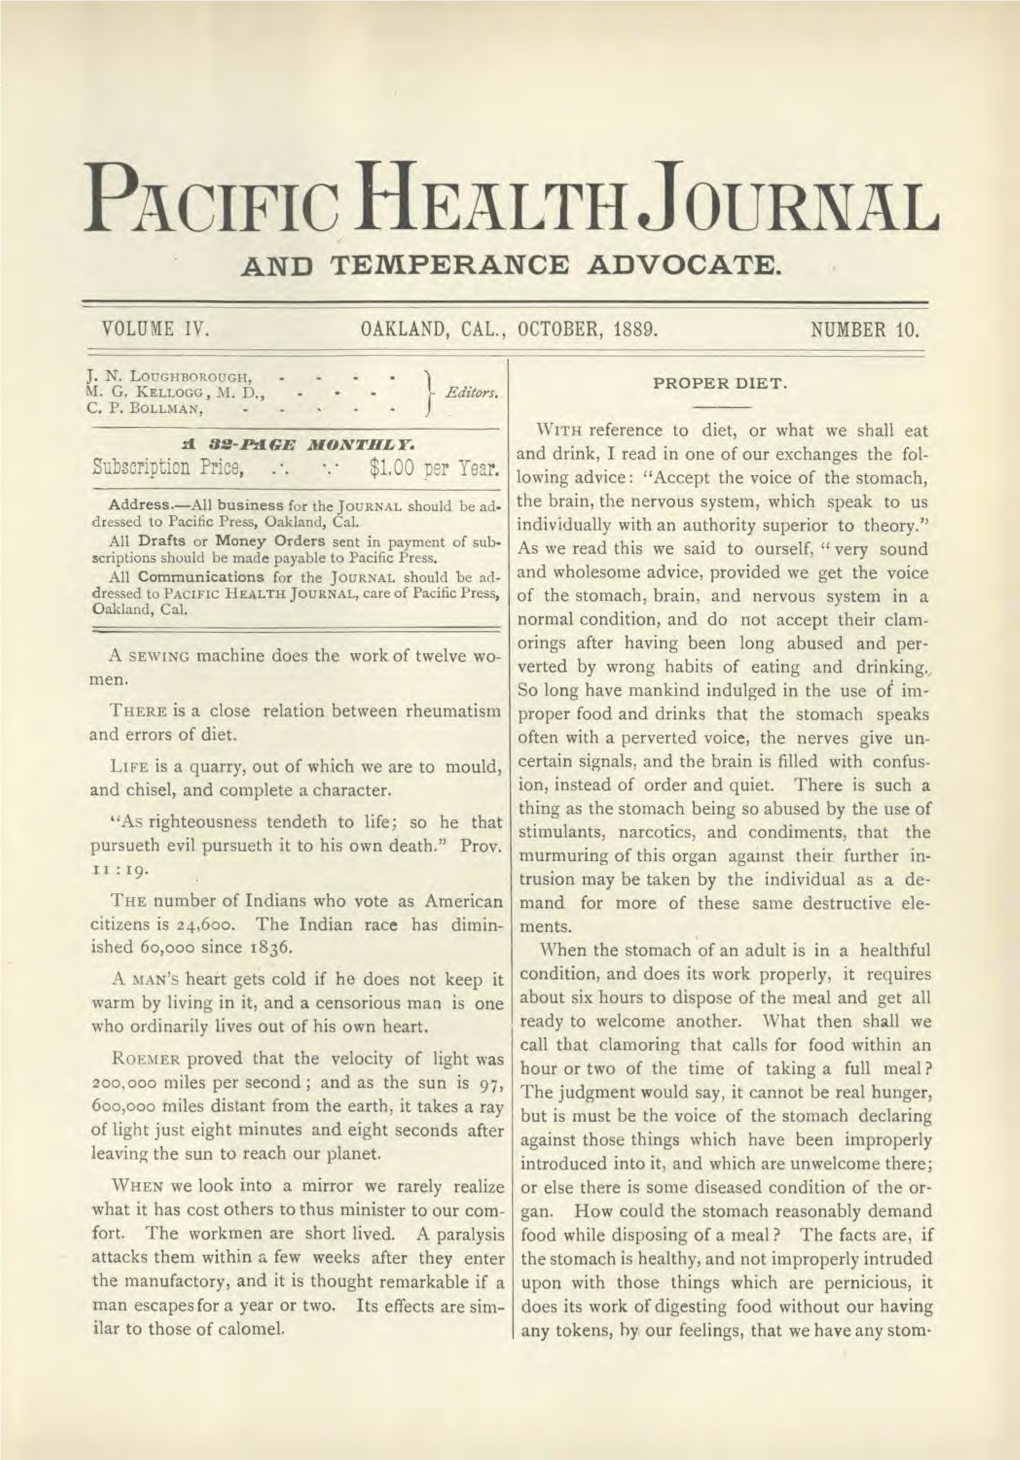 The Pacific Health Journal and Temperance Advocate for 1889